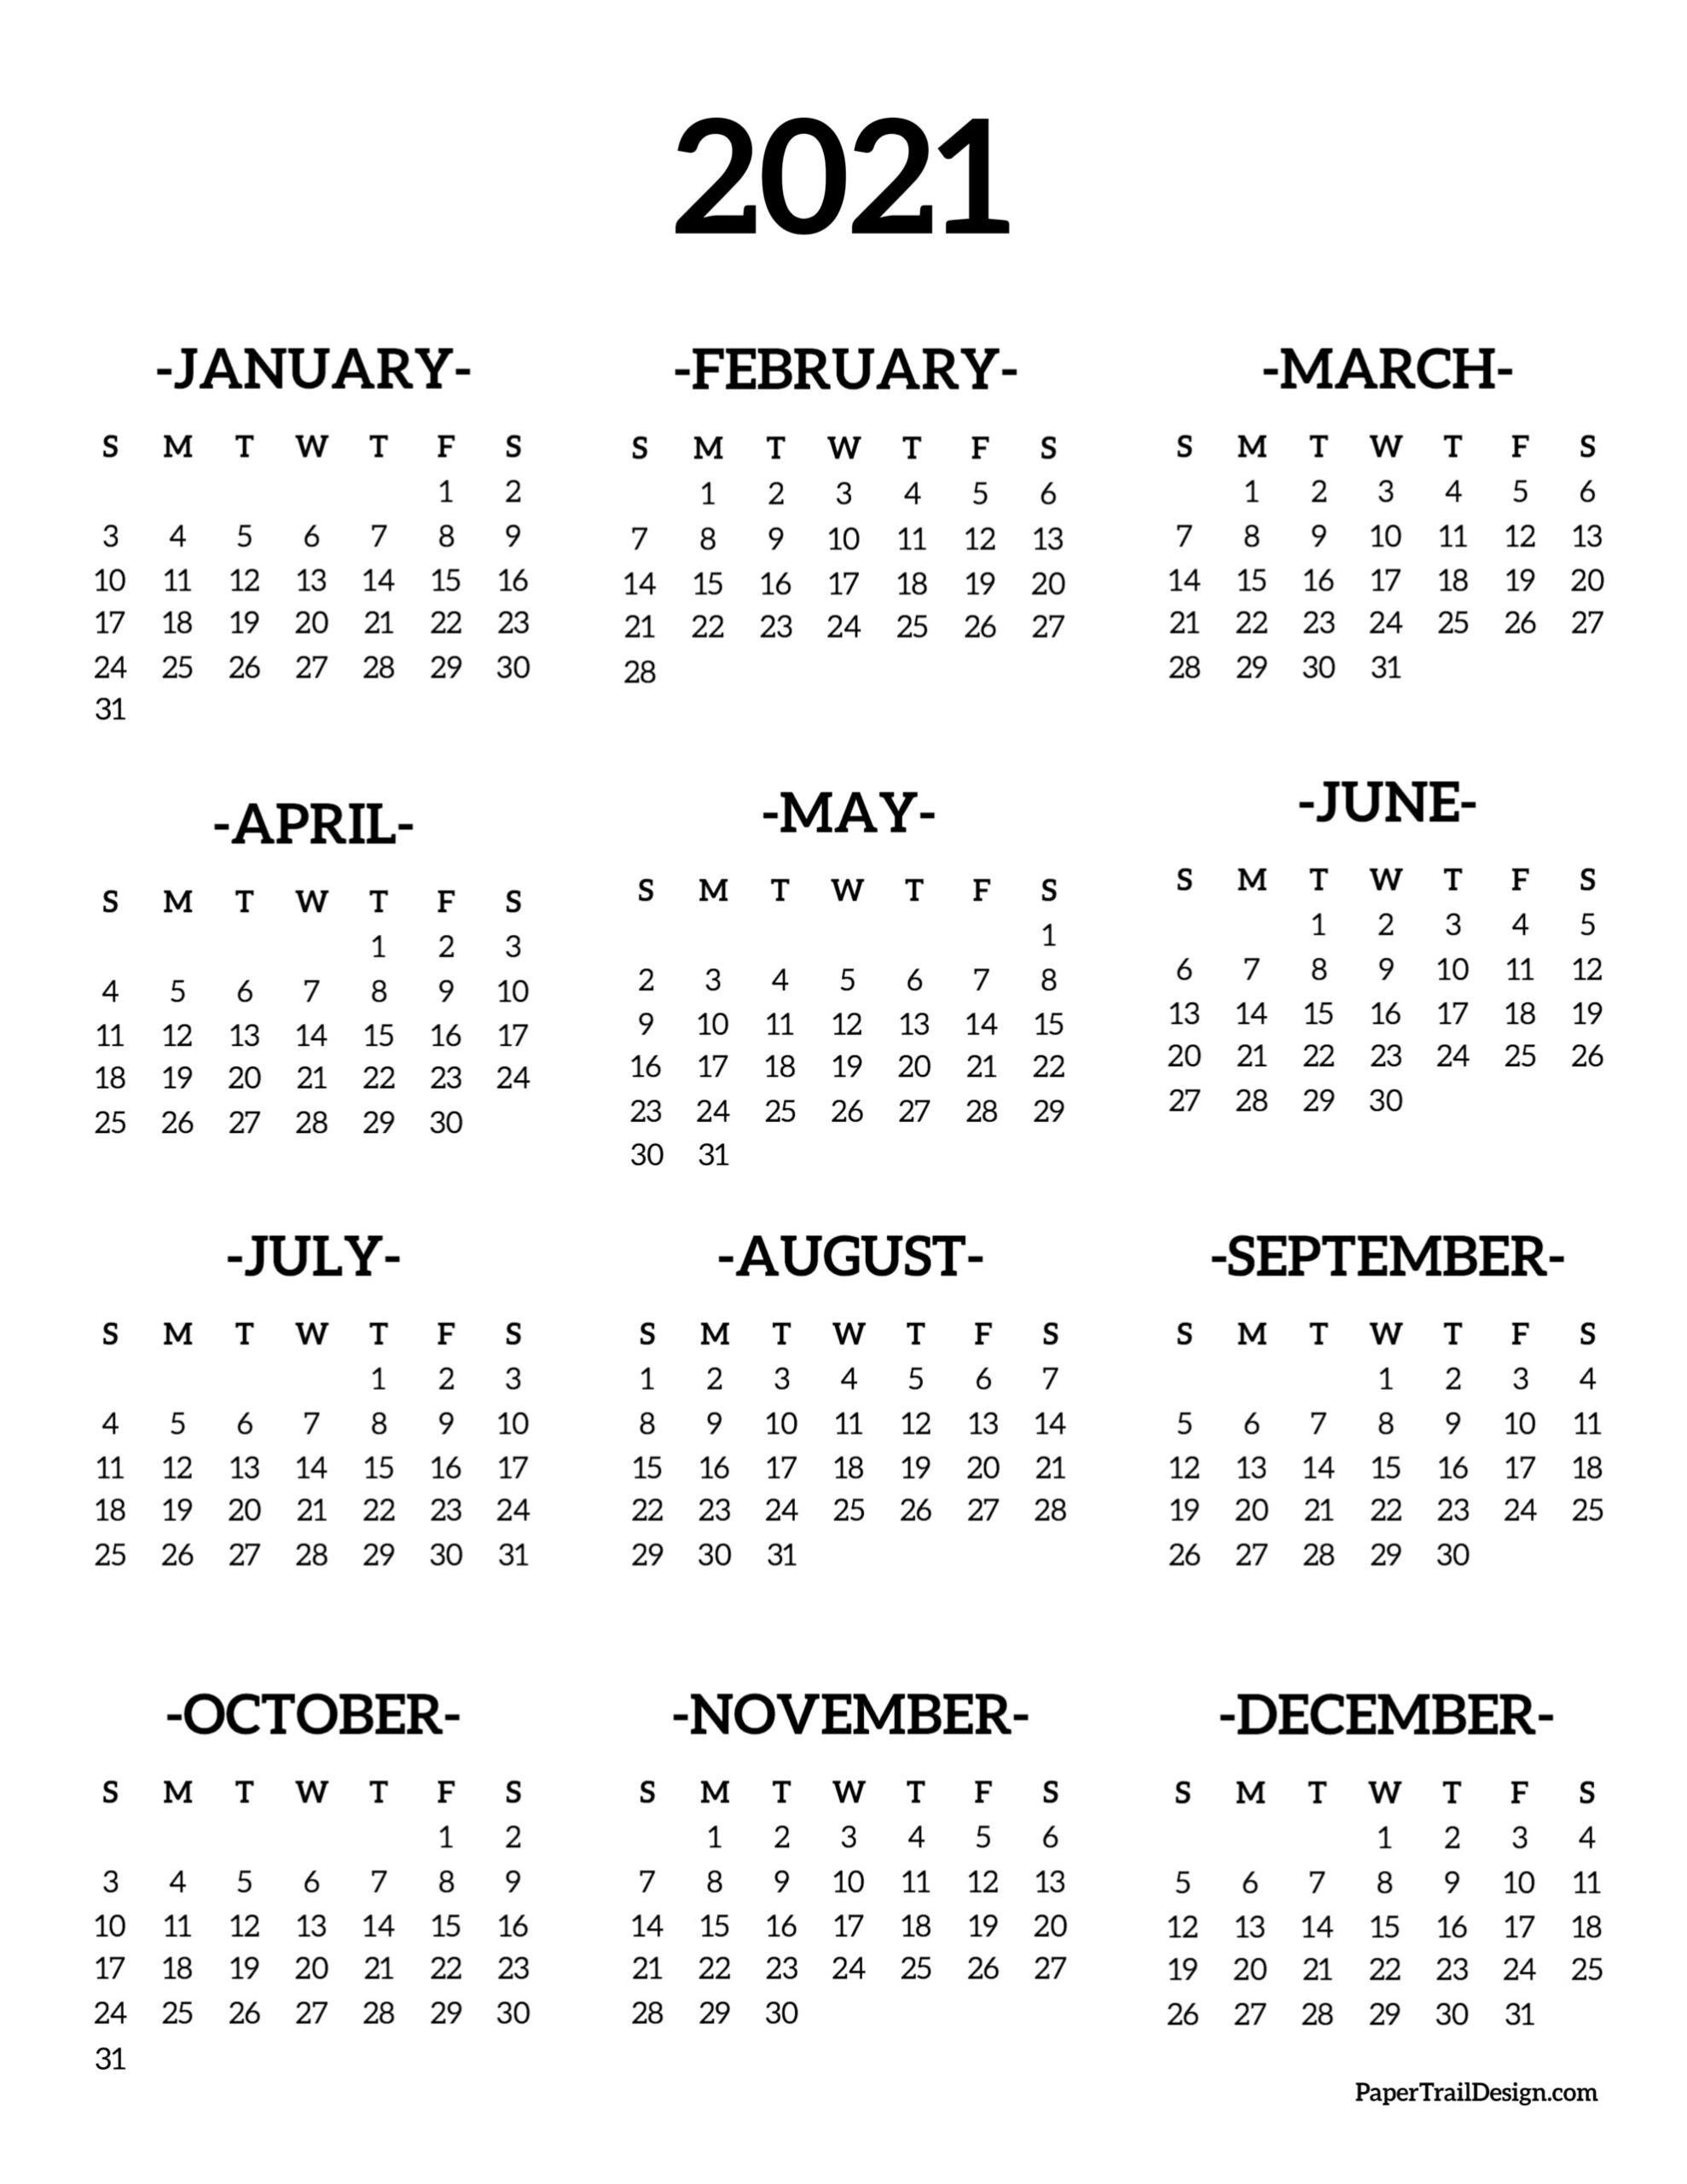 Calendar 2021 Printable One Page | Paper Trail Design pertaining to Free 3 Month Calendar One Page 2021